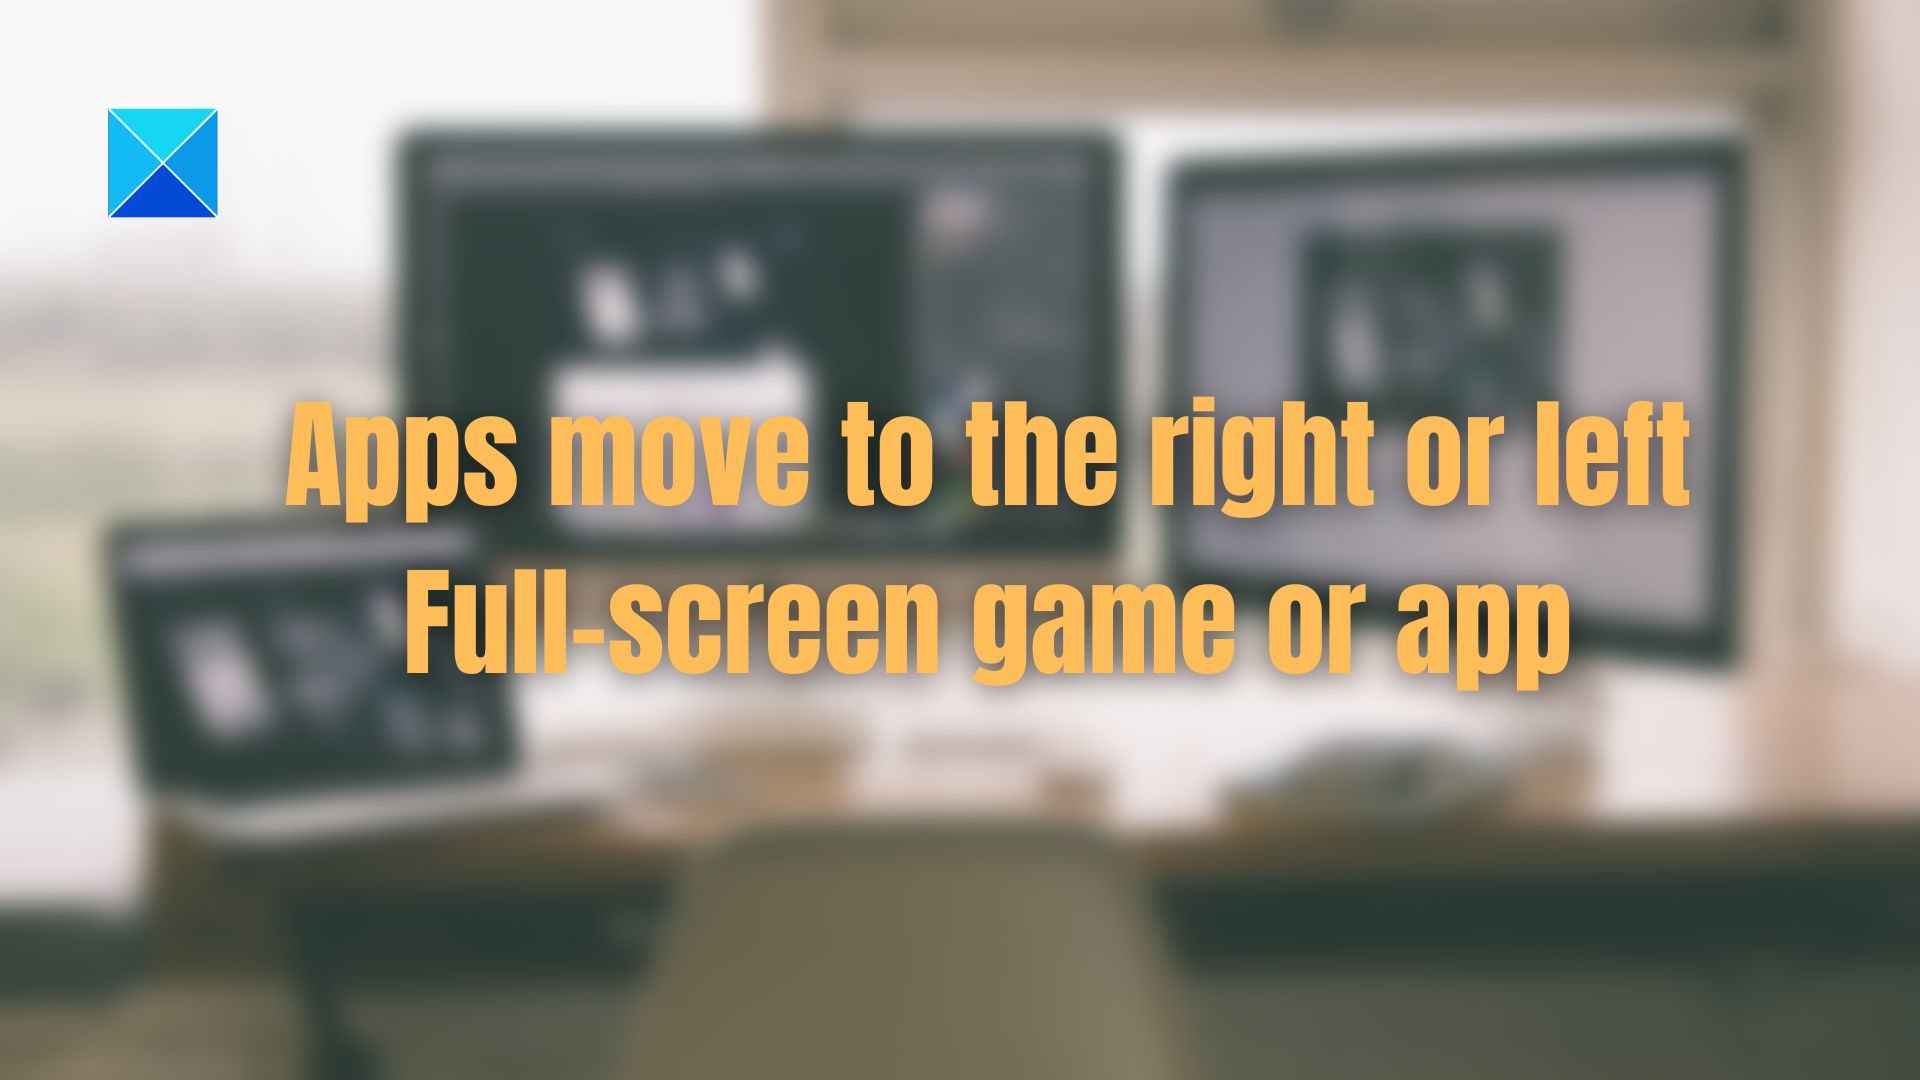 Apps move to the right or left when launching a full-screen game